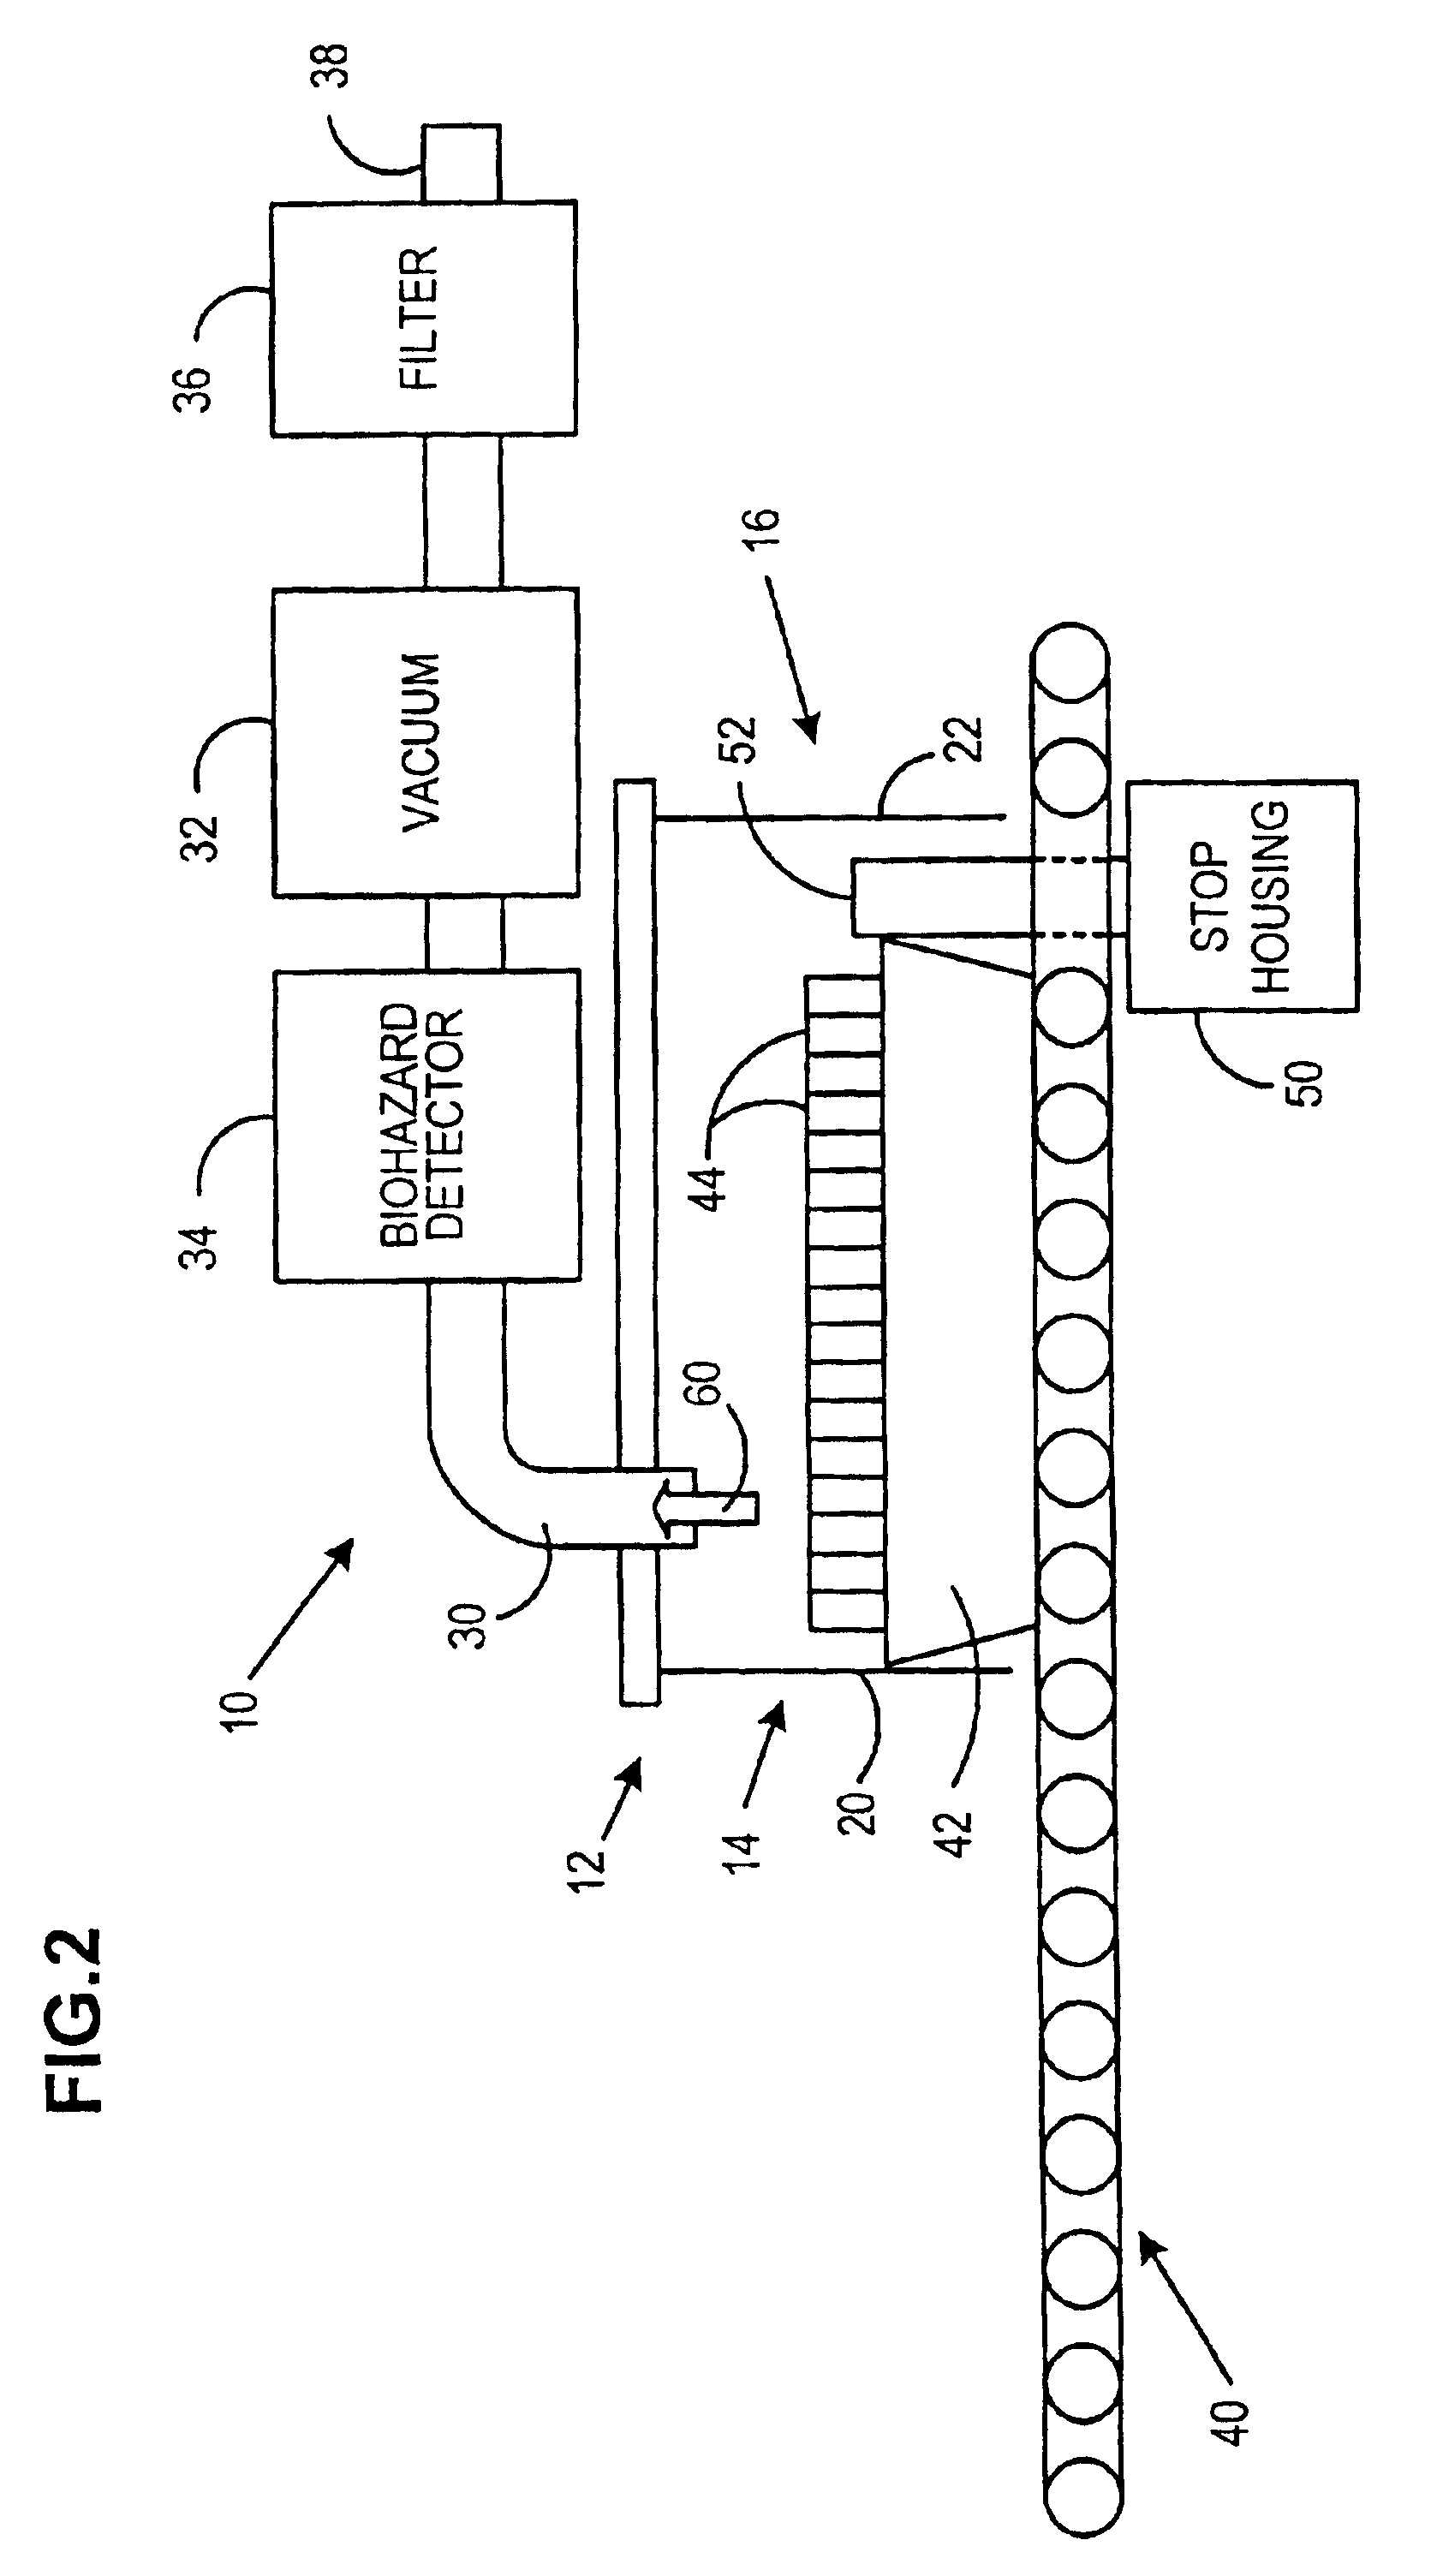 Method and system for detection of contaminants in mail